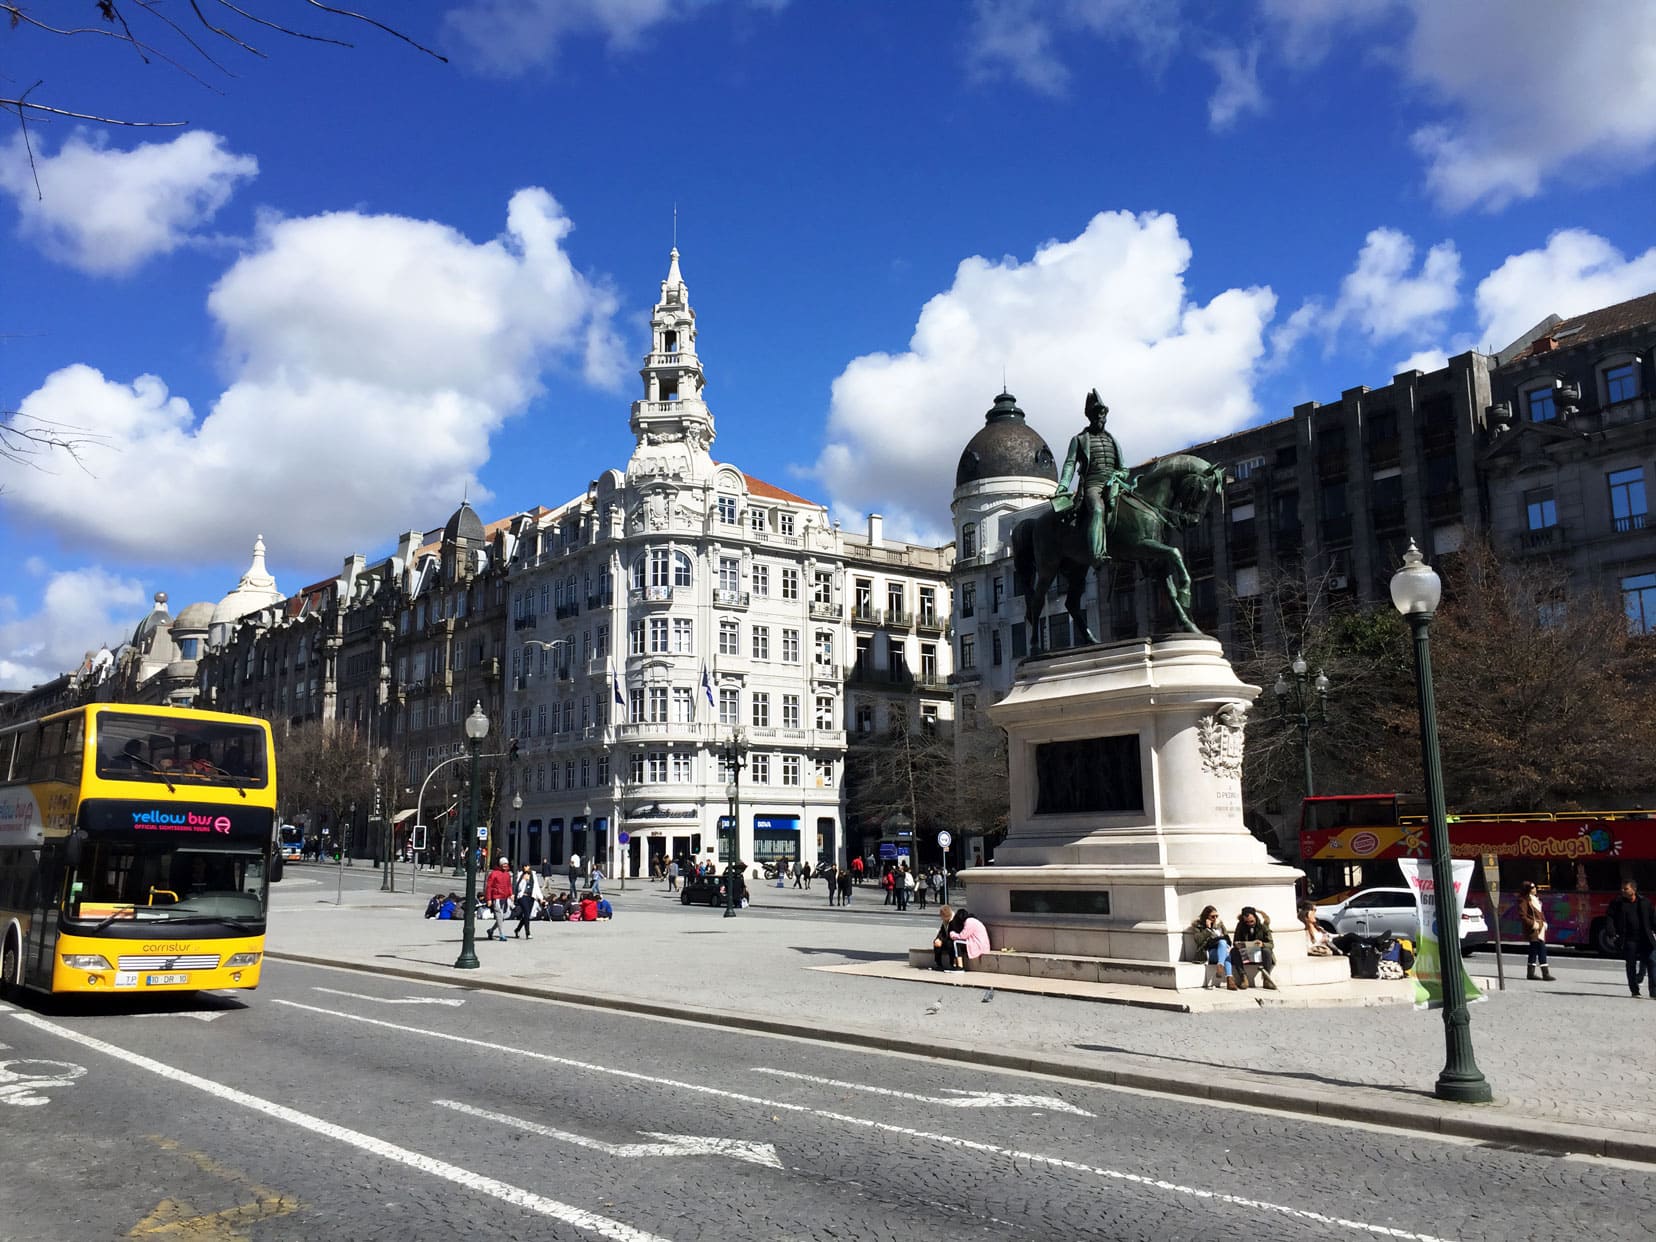 Street view of Liberty Square with statue and yellow tourist bus